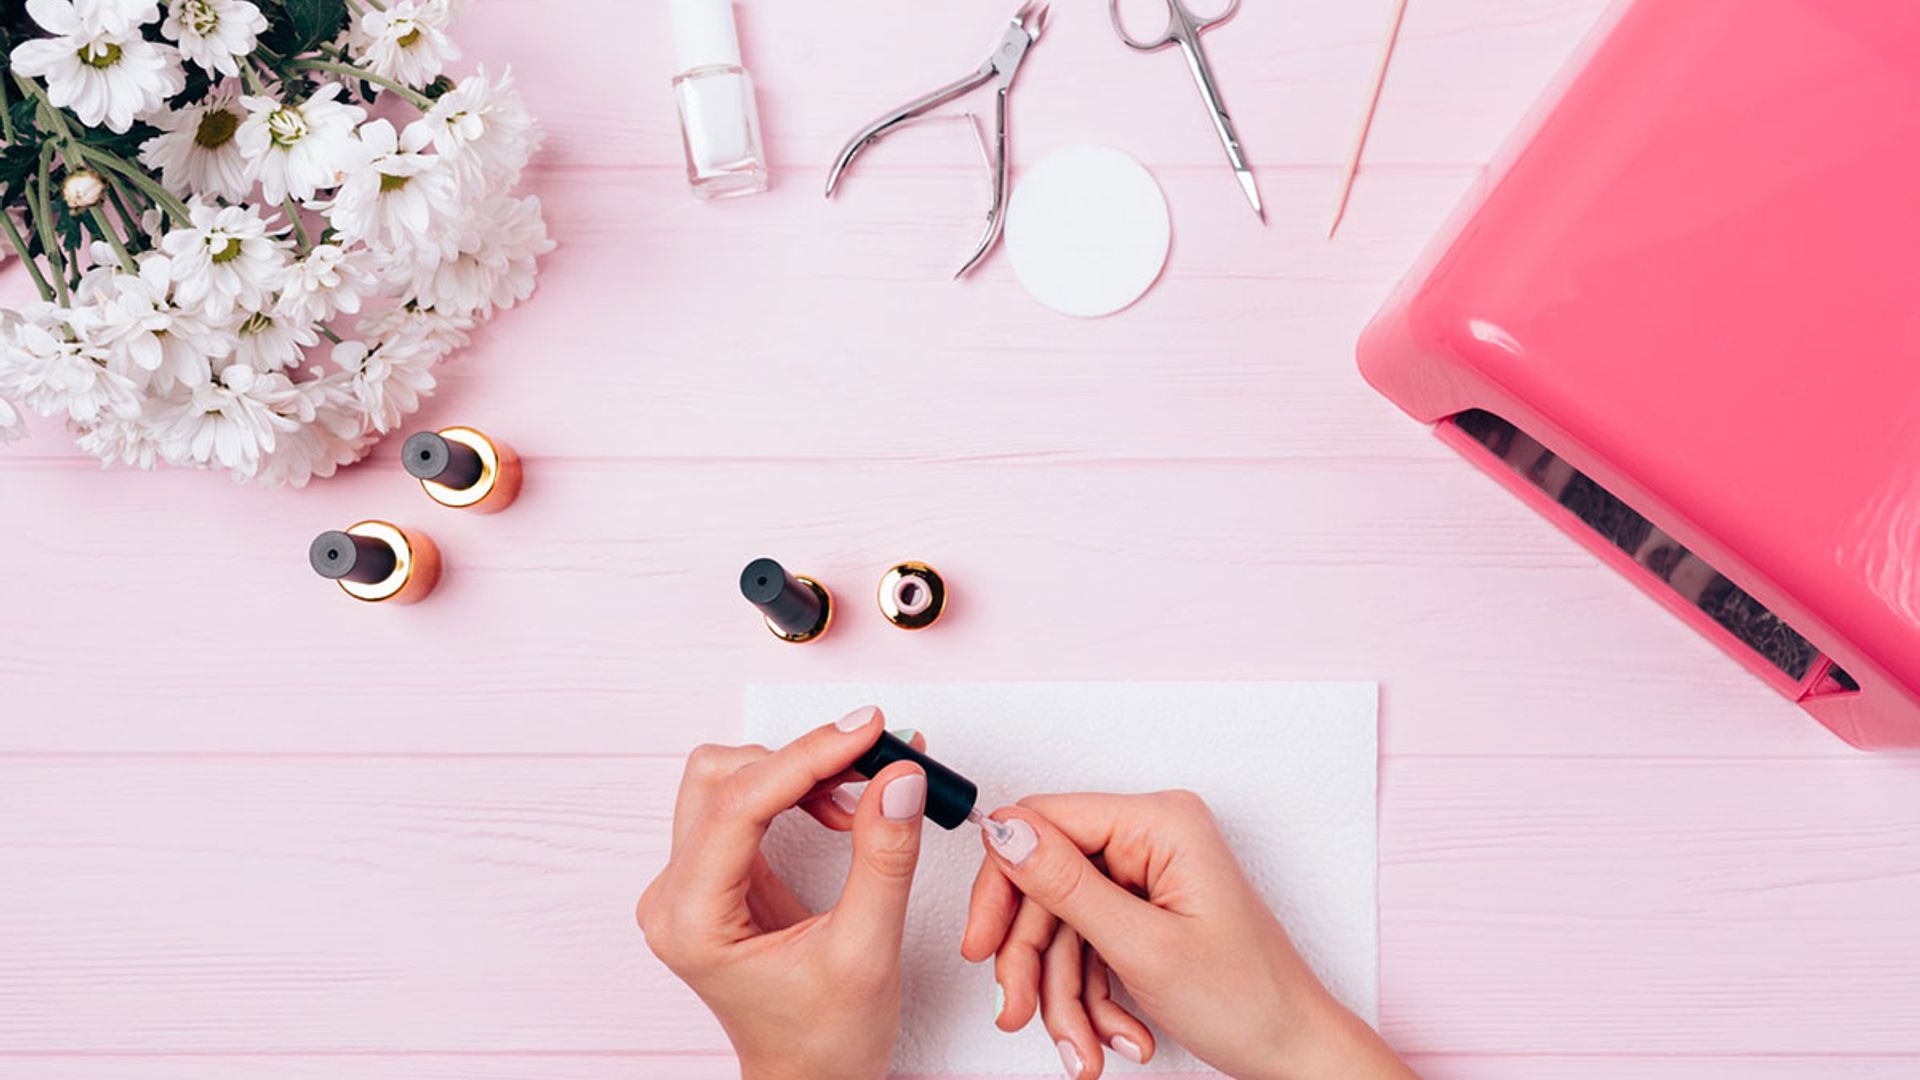 How to do an at-home manicure: Expert tips for creating glamorous winter nails